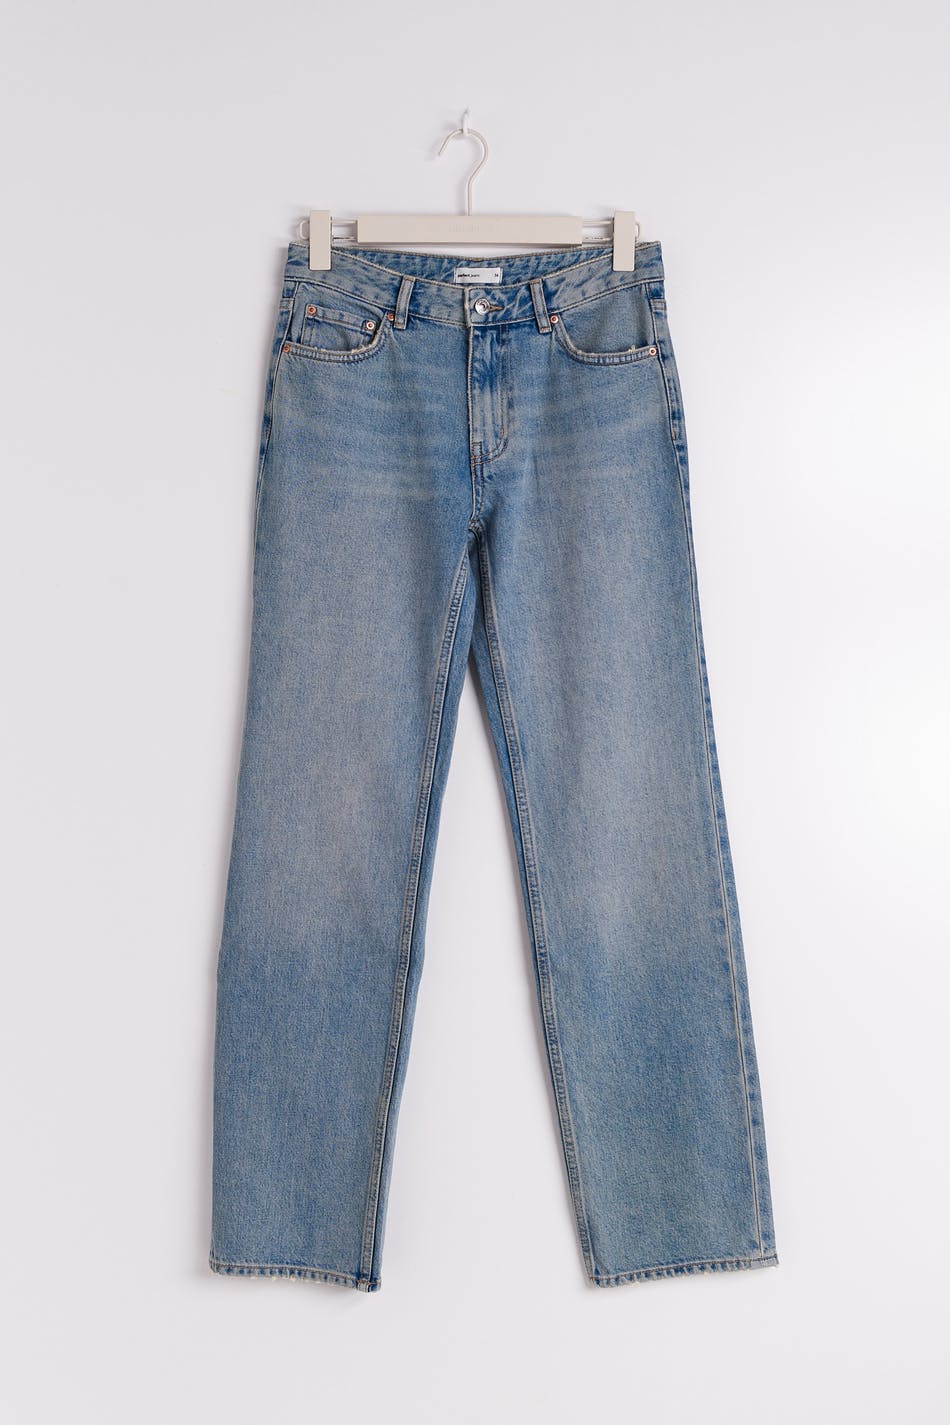 Gina Tricot - Low straight tall jeans - low waist jeans - Blue - 44 - Female